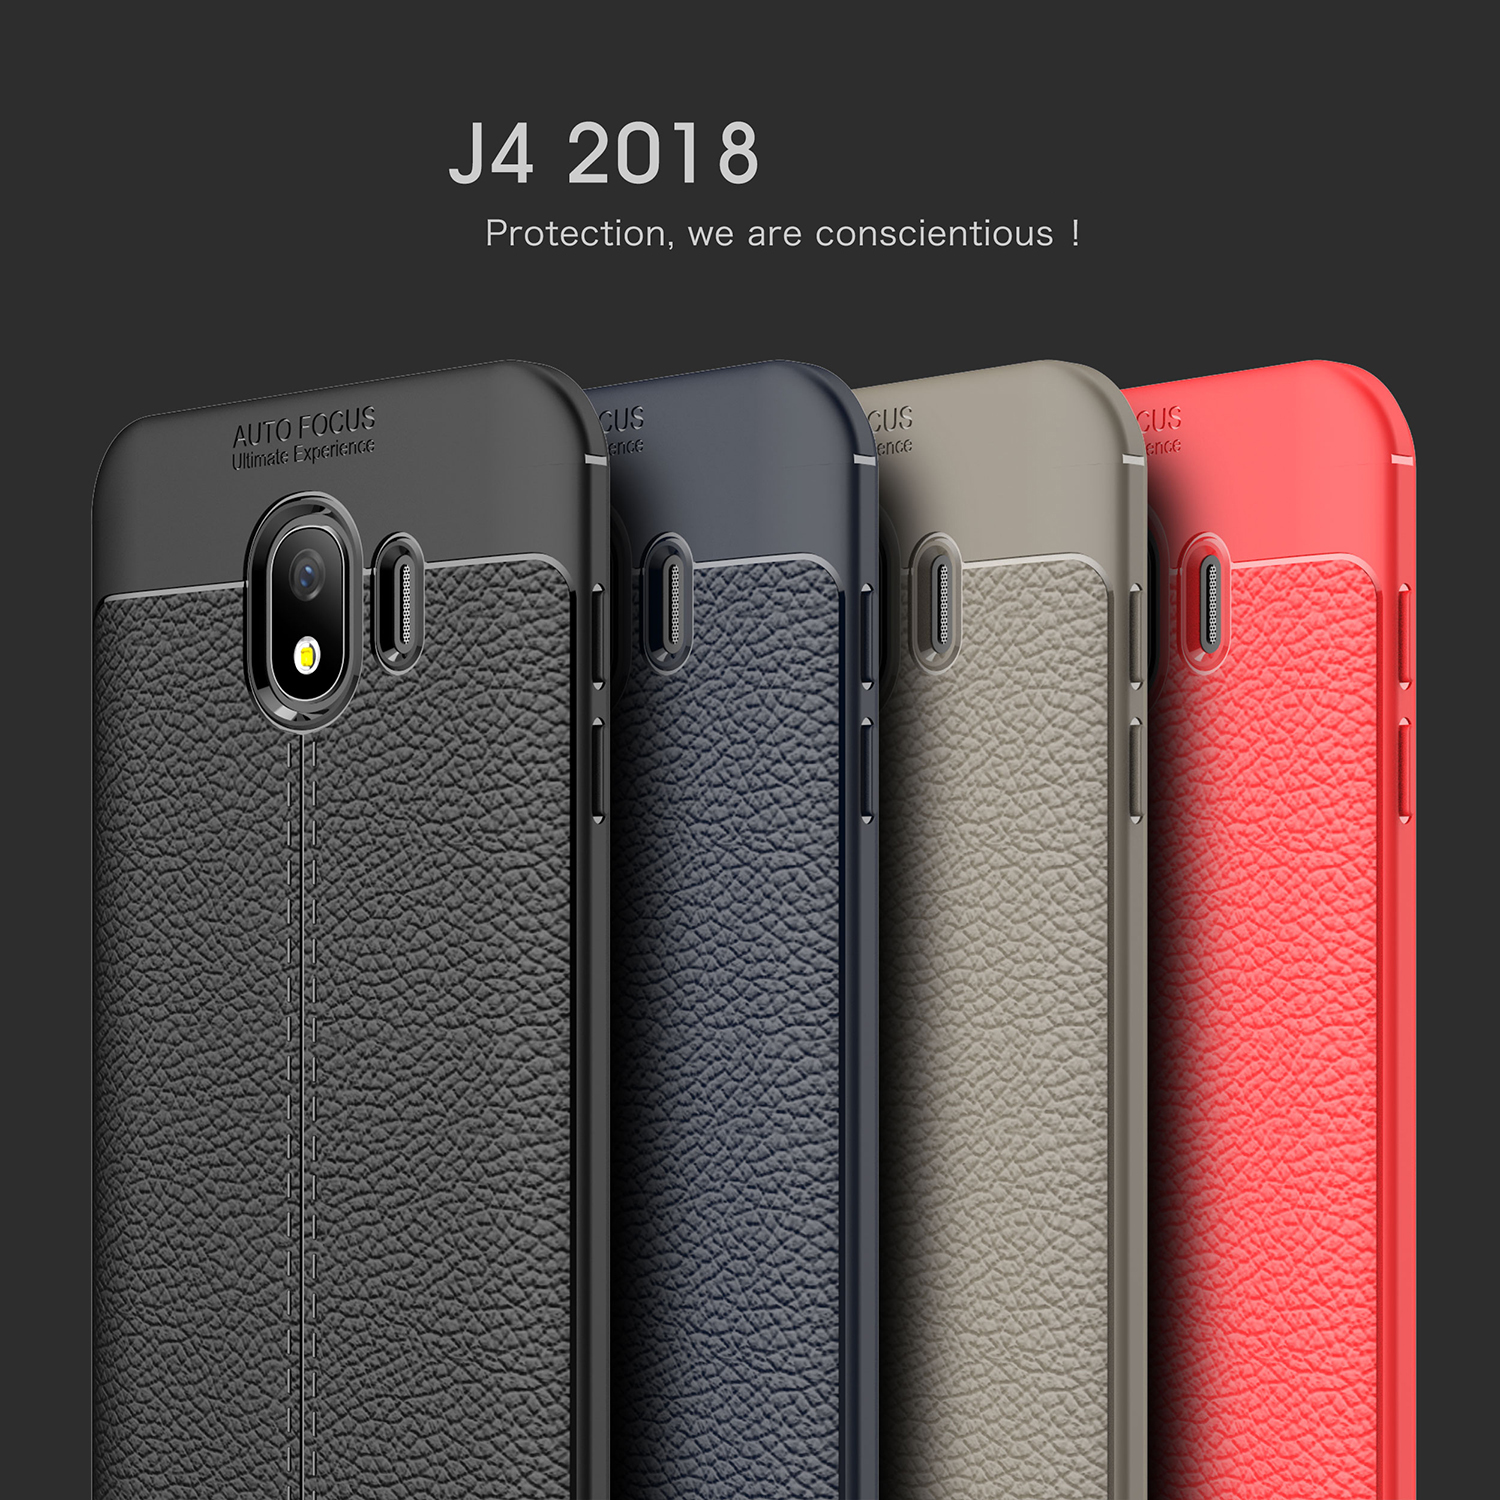 Bakeey-Litchi-Leather-Soft-TPU-Protective-Case-for-Samsung-Galaxy-J4-2018-EU-Version-1312875-1